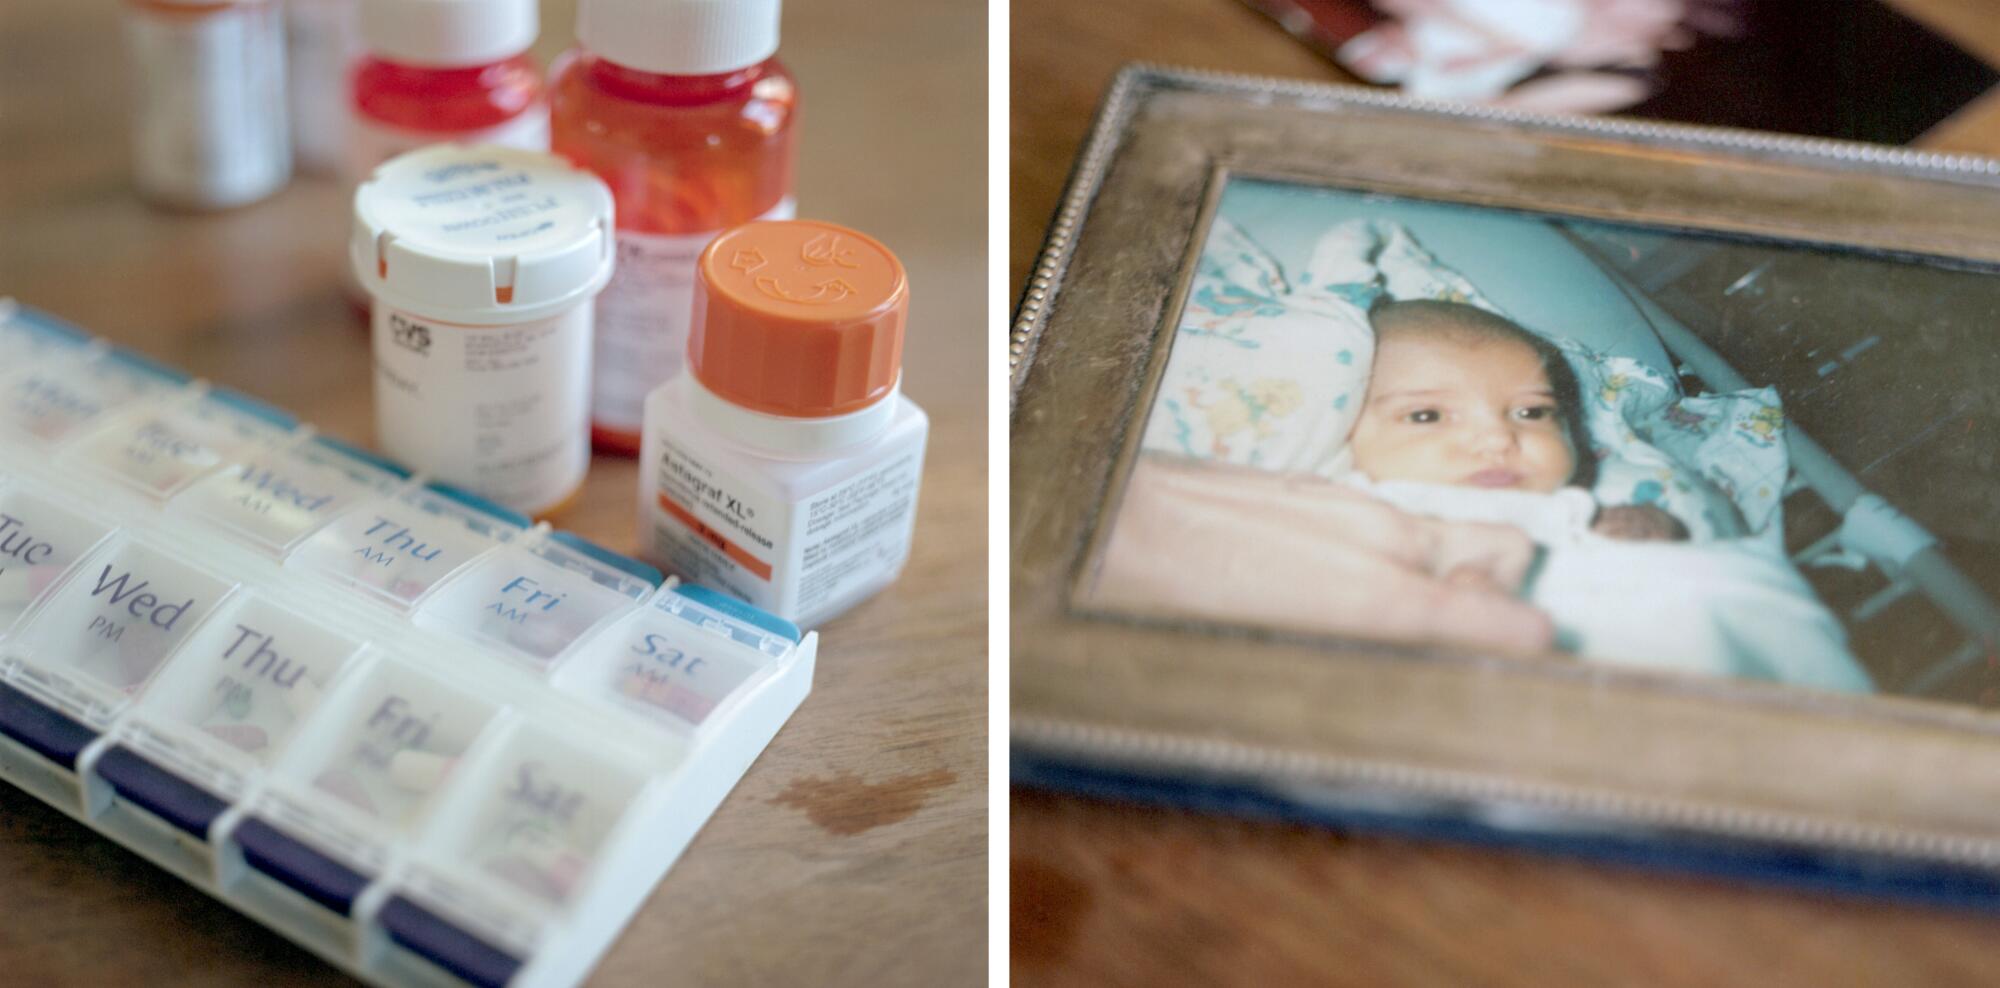 Medicine, left, sits on a table. A framed photo, right, shows a baby in a hospital bed.